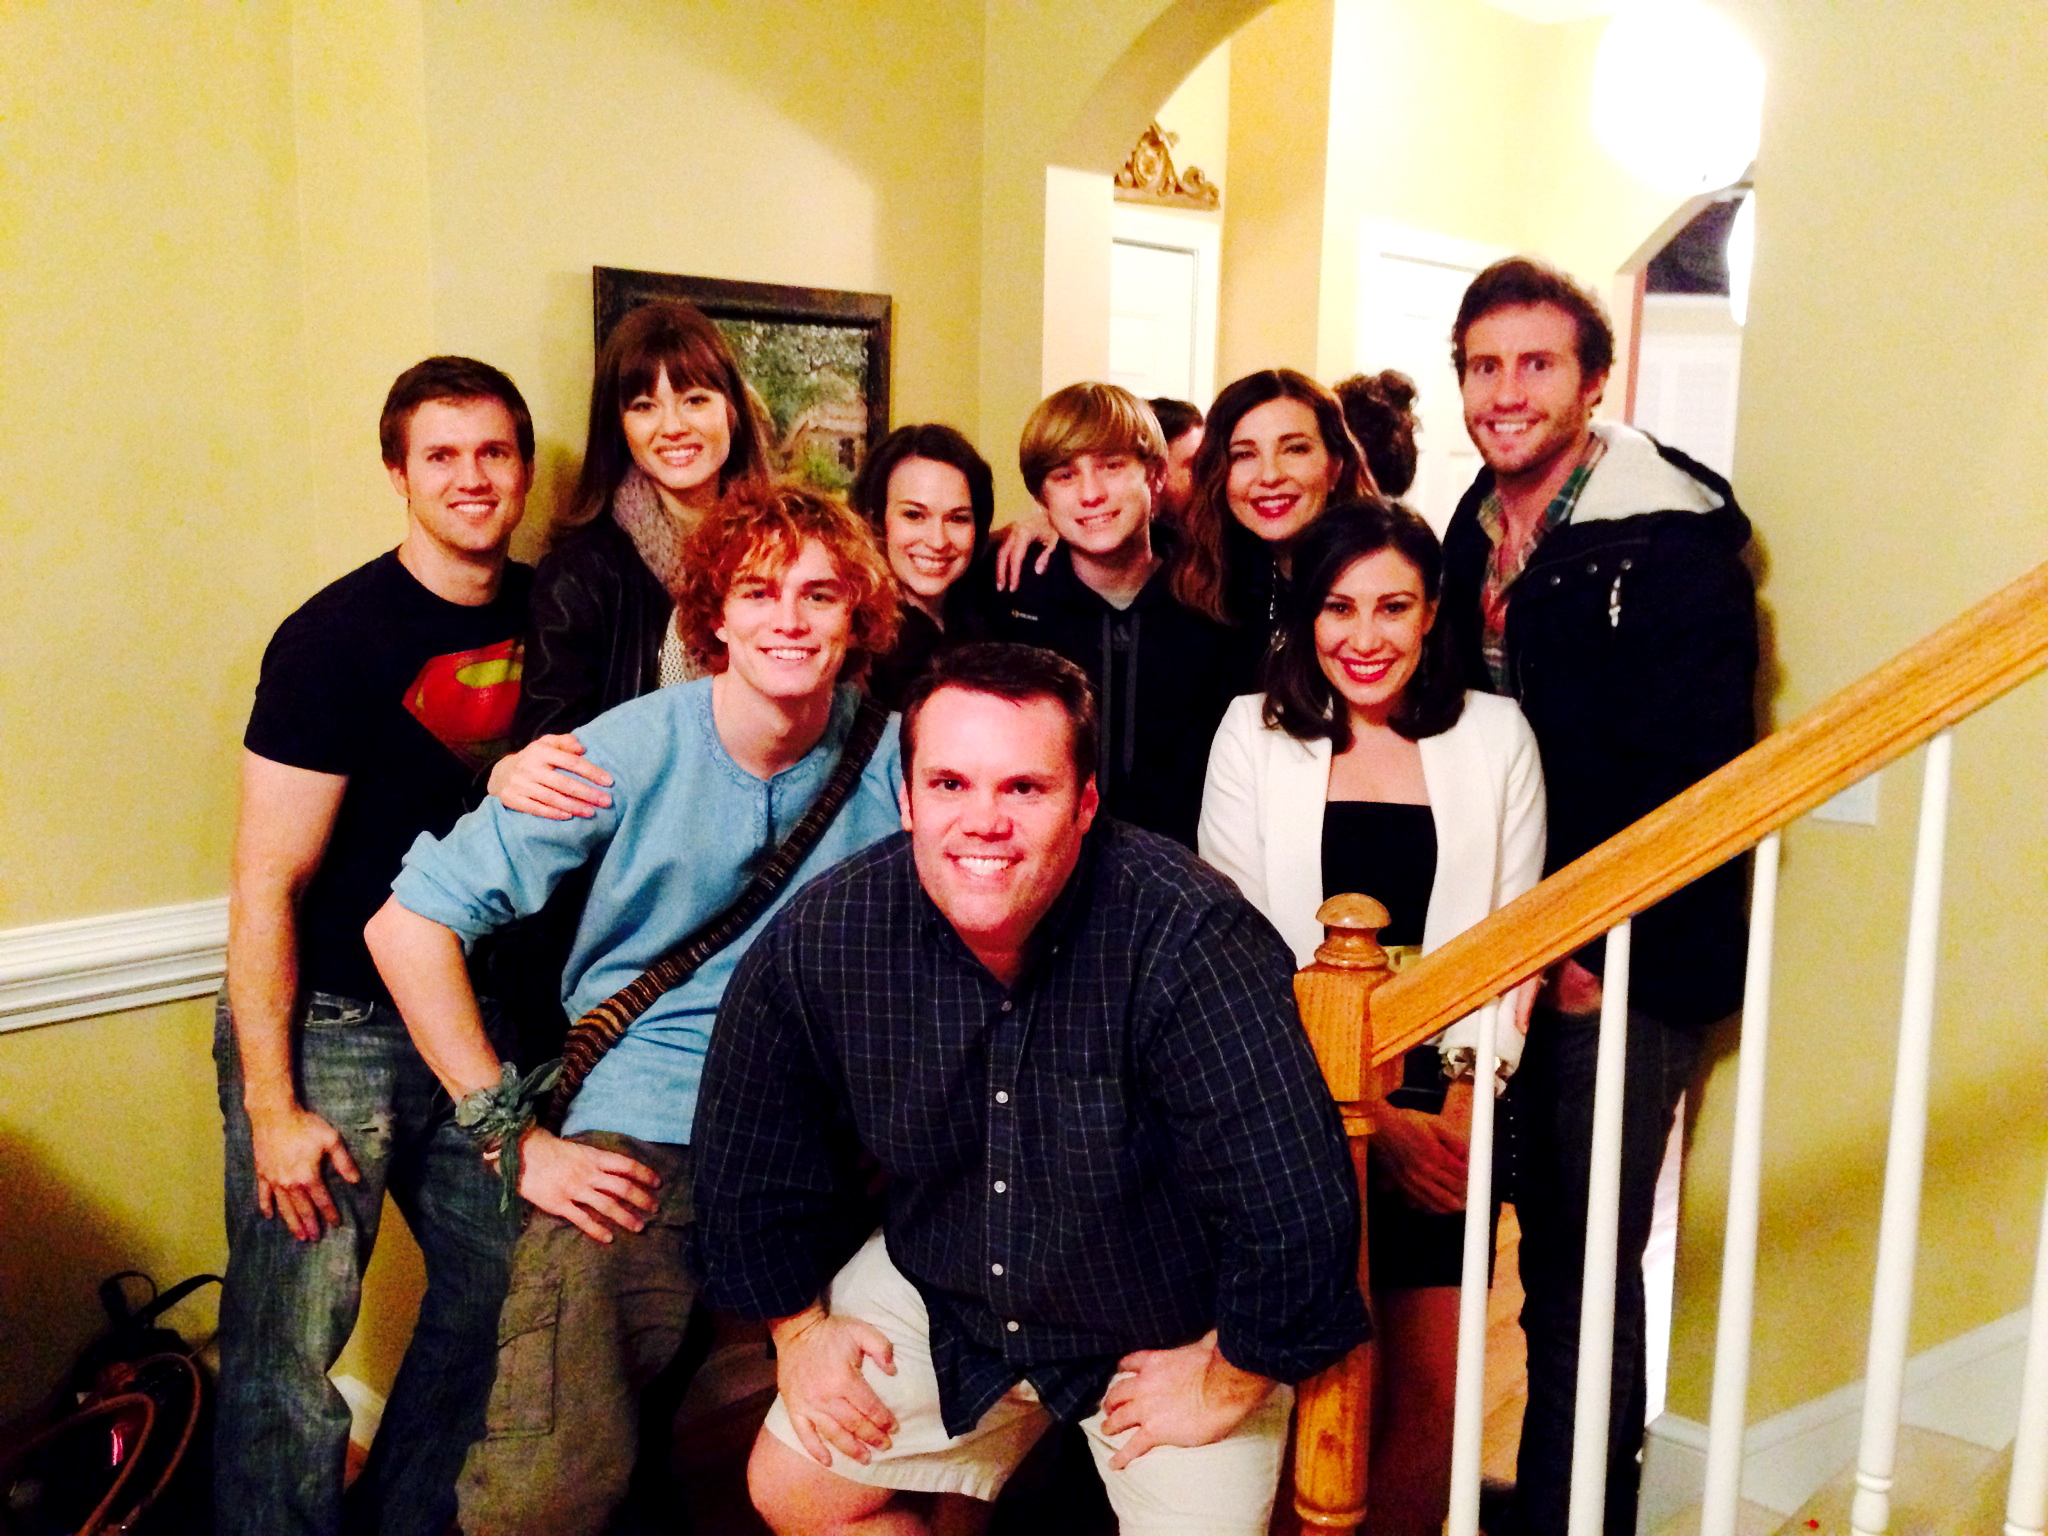 Cast and Crew at the pilot taping of The Summers Sisters. Co-directors Cecil Stokes and Josh Summers with actors Alexander Nifong, Colleen Trusler, Rachel Hendrix, Levi Wiedmann, Shari Rigby, Susannah Hicks and Jason Burkey